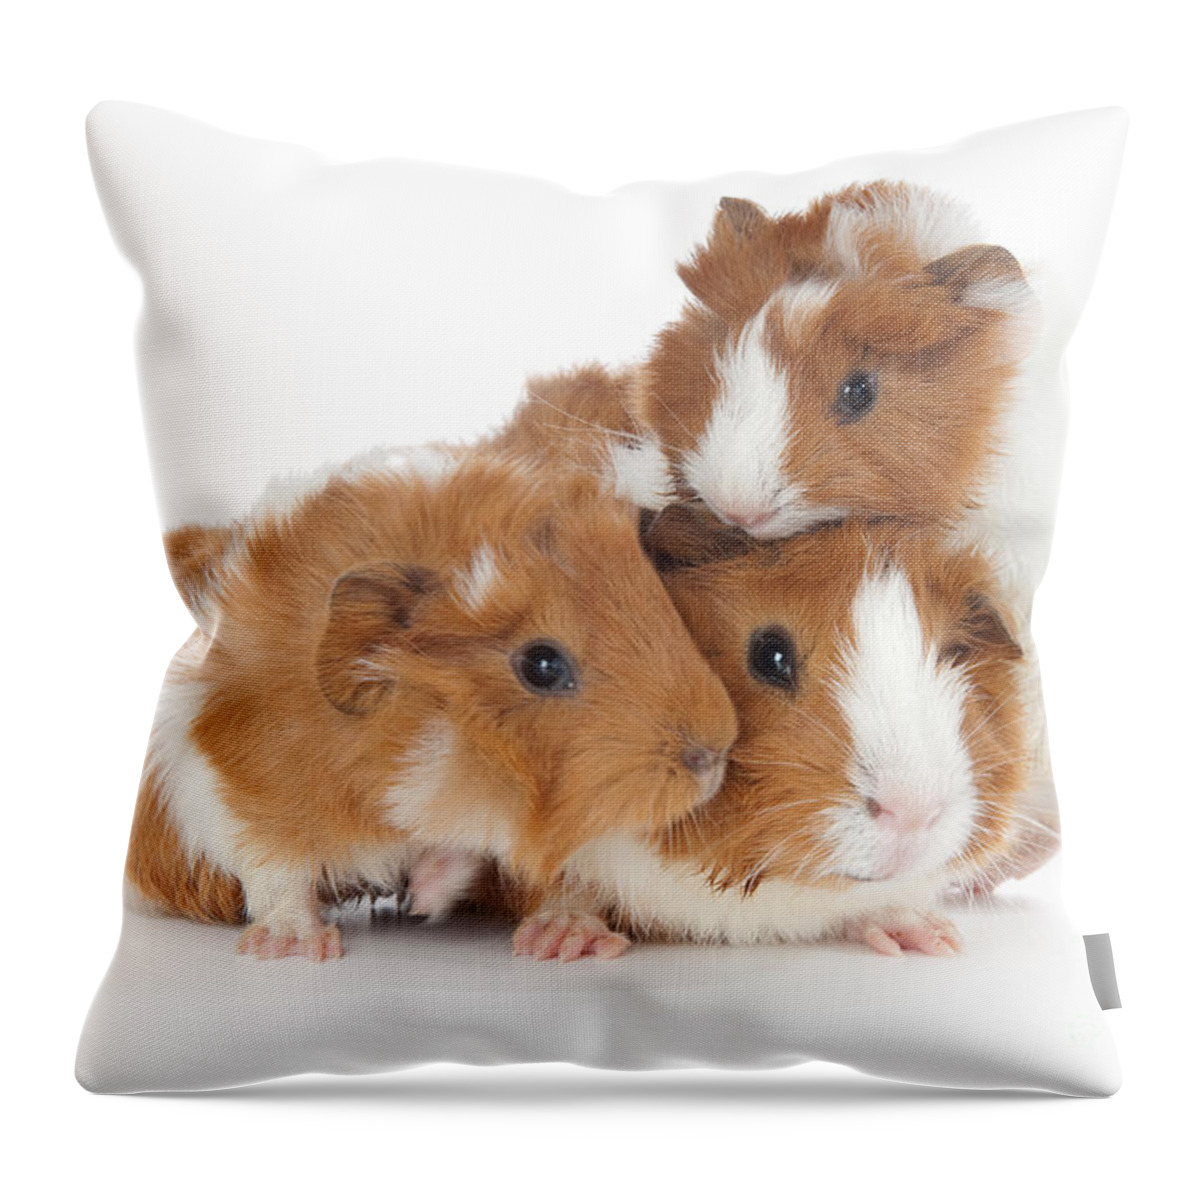 Abyssinian Guinea Pig Throw Pillow featuring the photograph Abyssinian Guinea Pig #4 by Anthony Totah